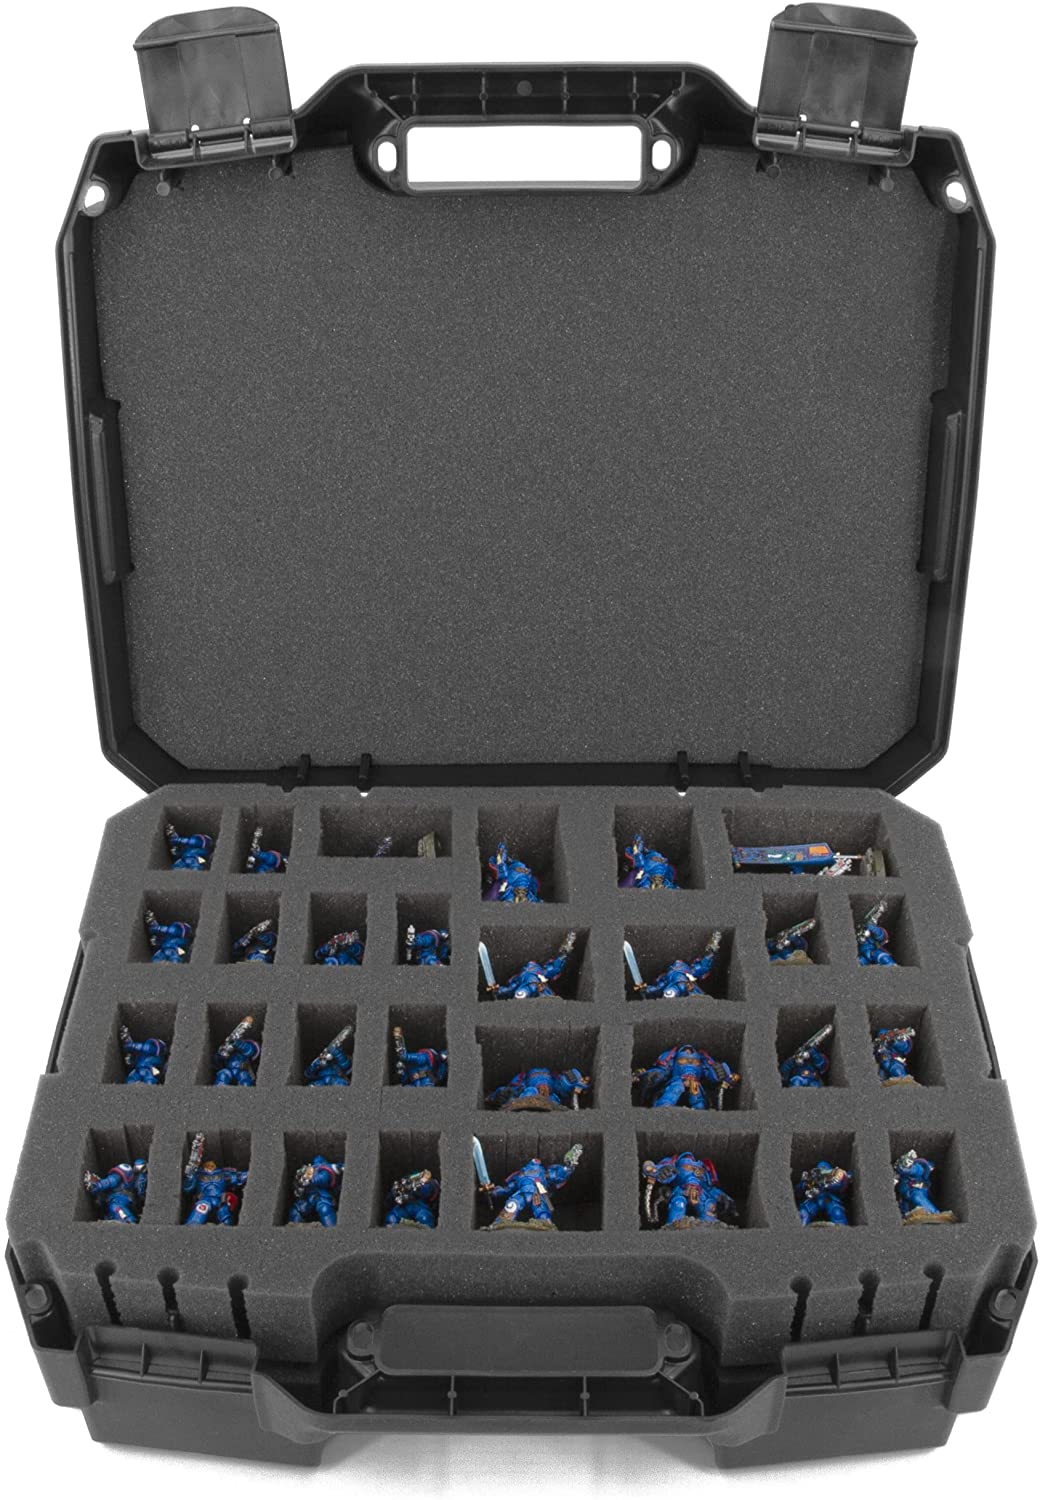 Casematix Miniatures Carrying Case with Fits Warhammer 40K, Dungeons & Dragons and More Tabletop Boardgame Figurines, Red Case Only, Size: 9 x 6.5 x